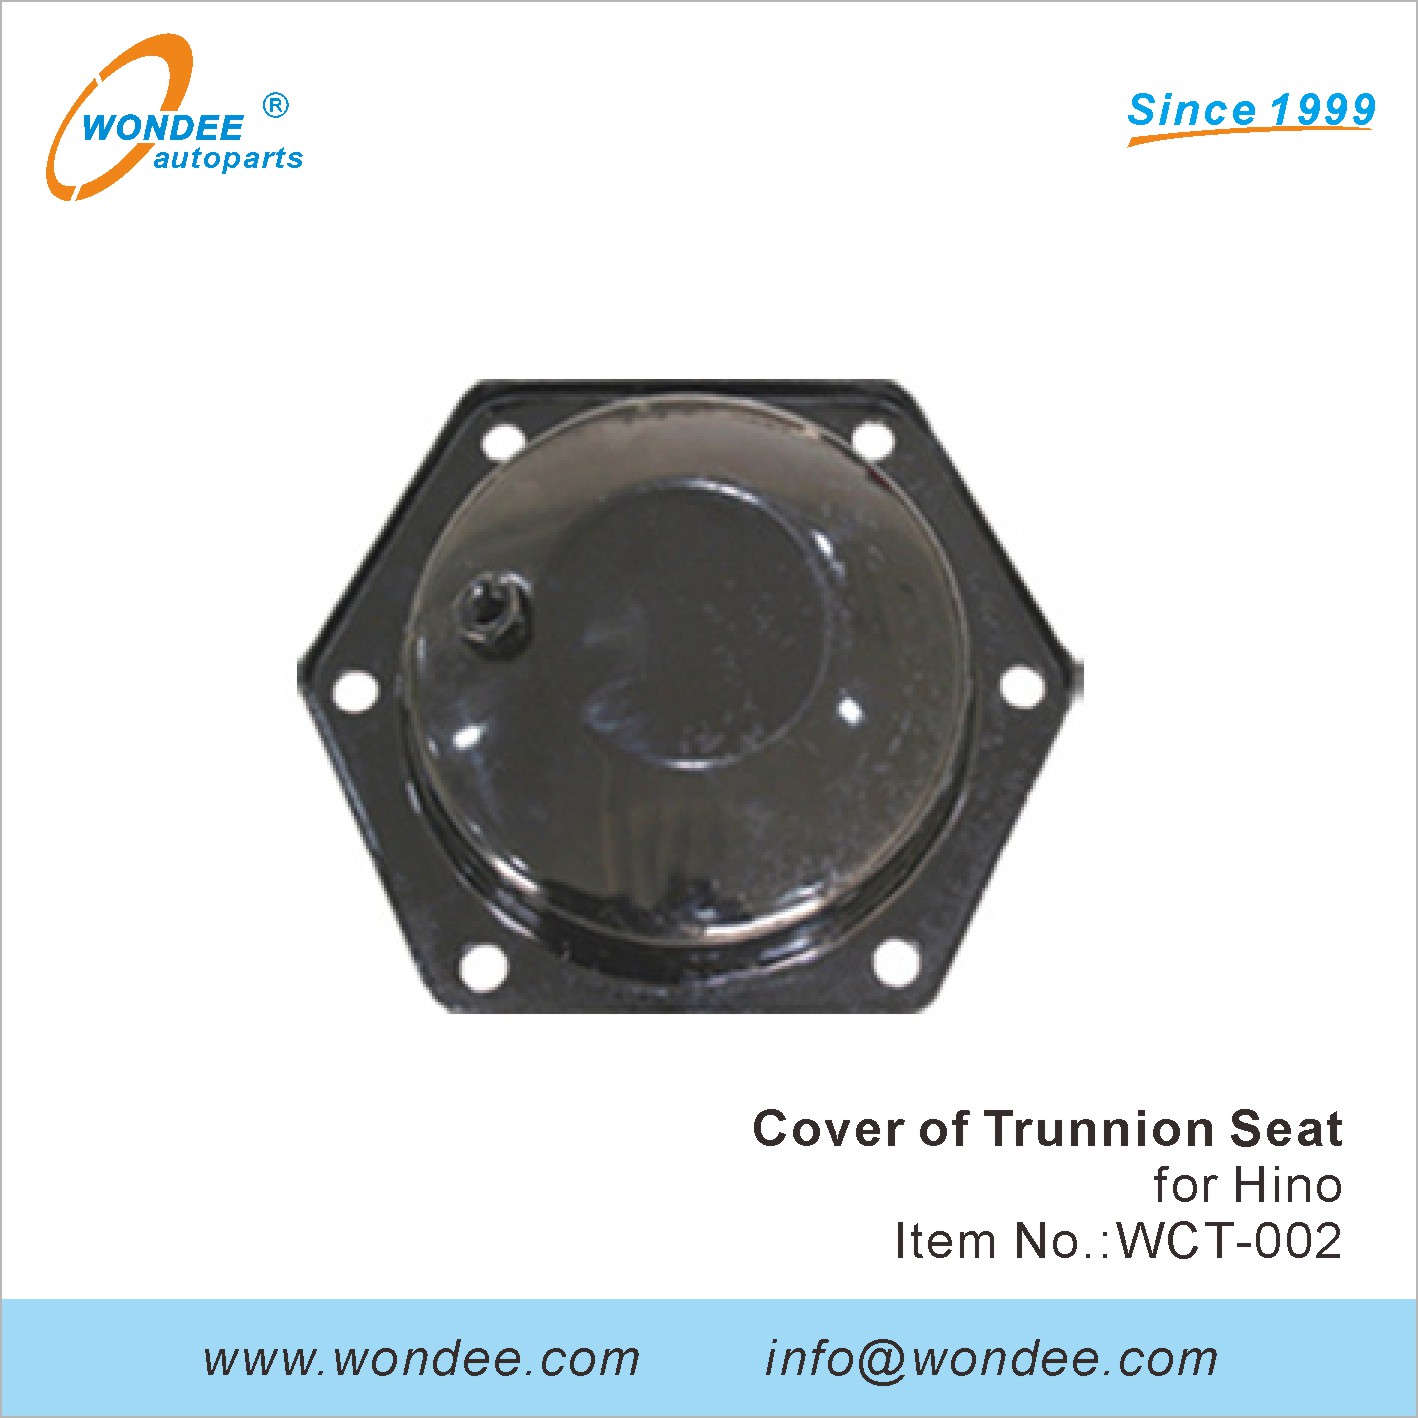 WONDEE cover of trunnion seat (2)